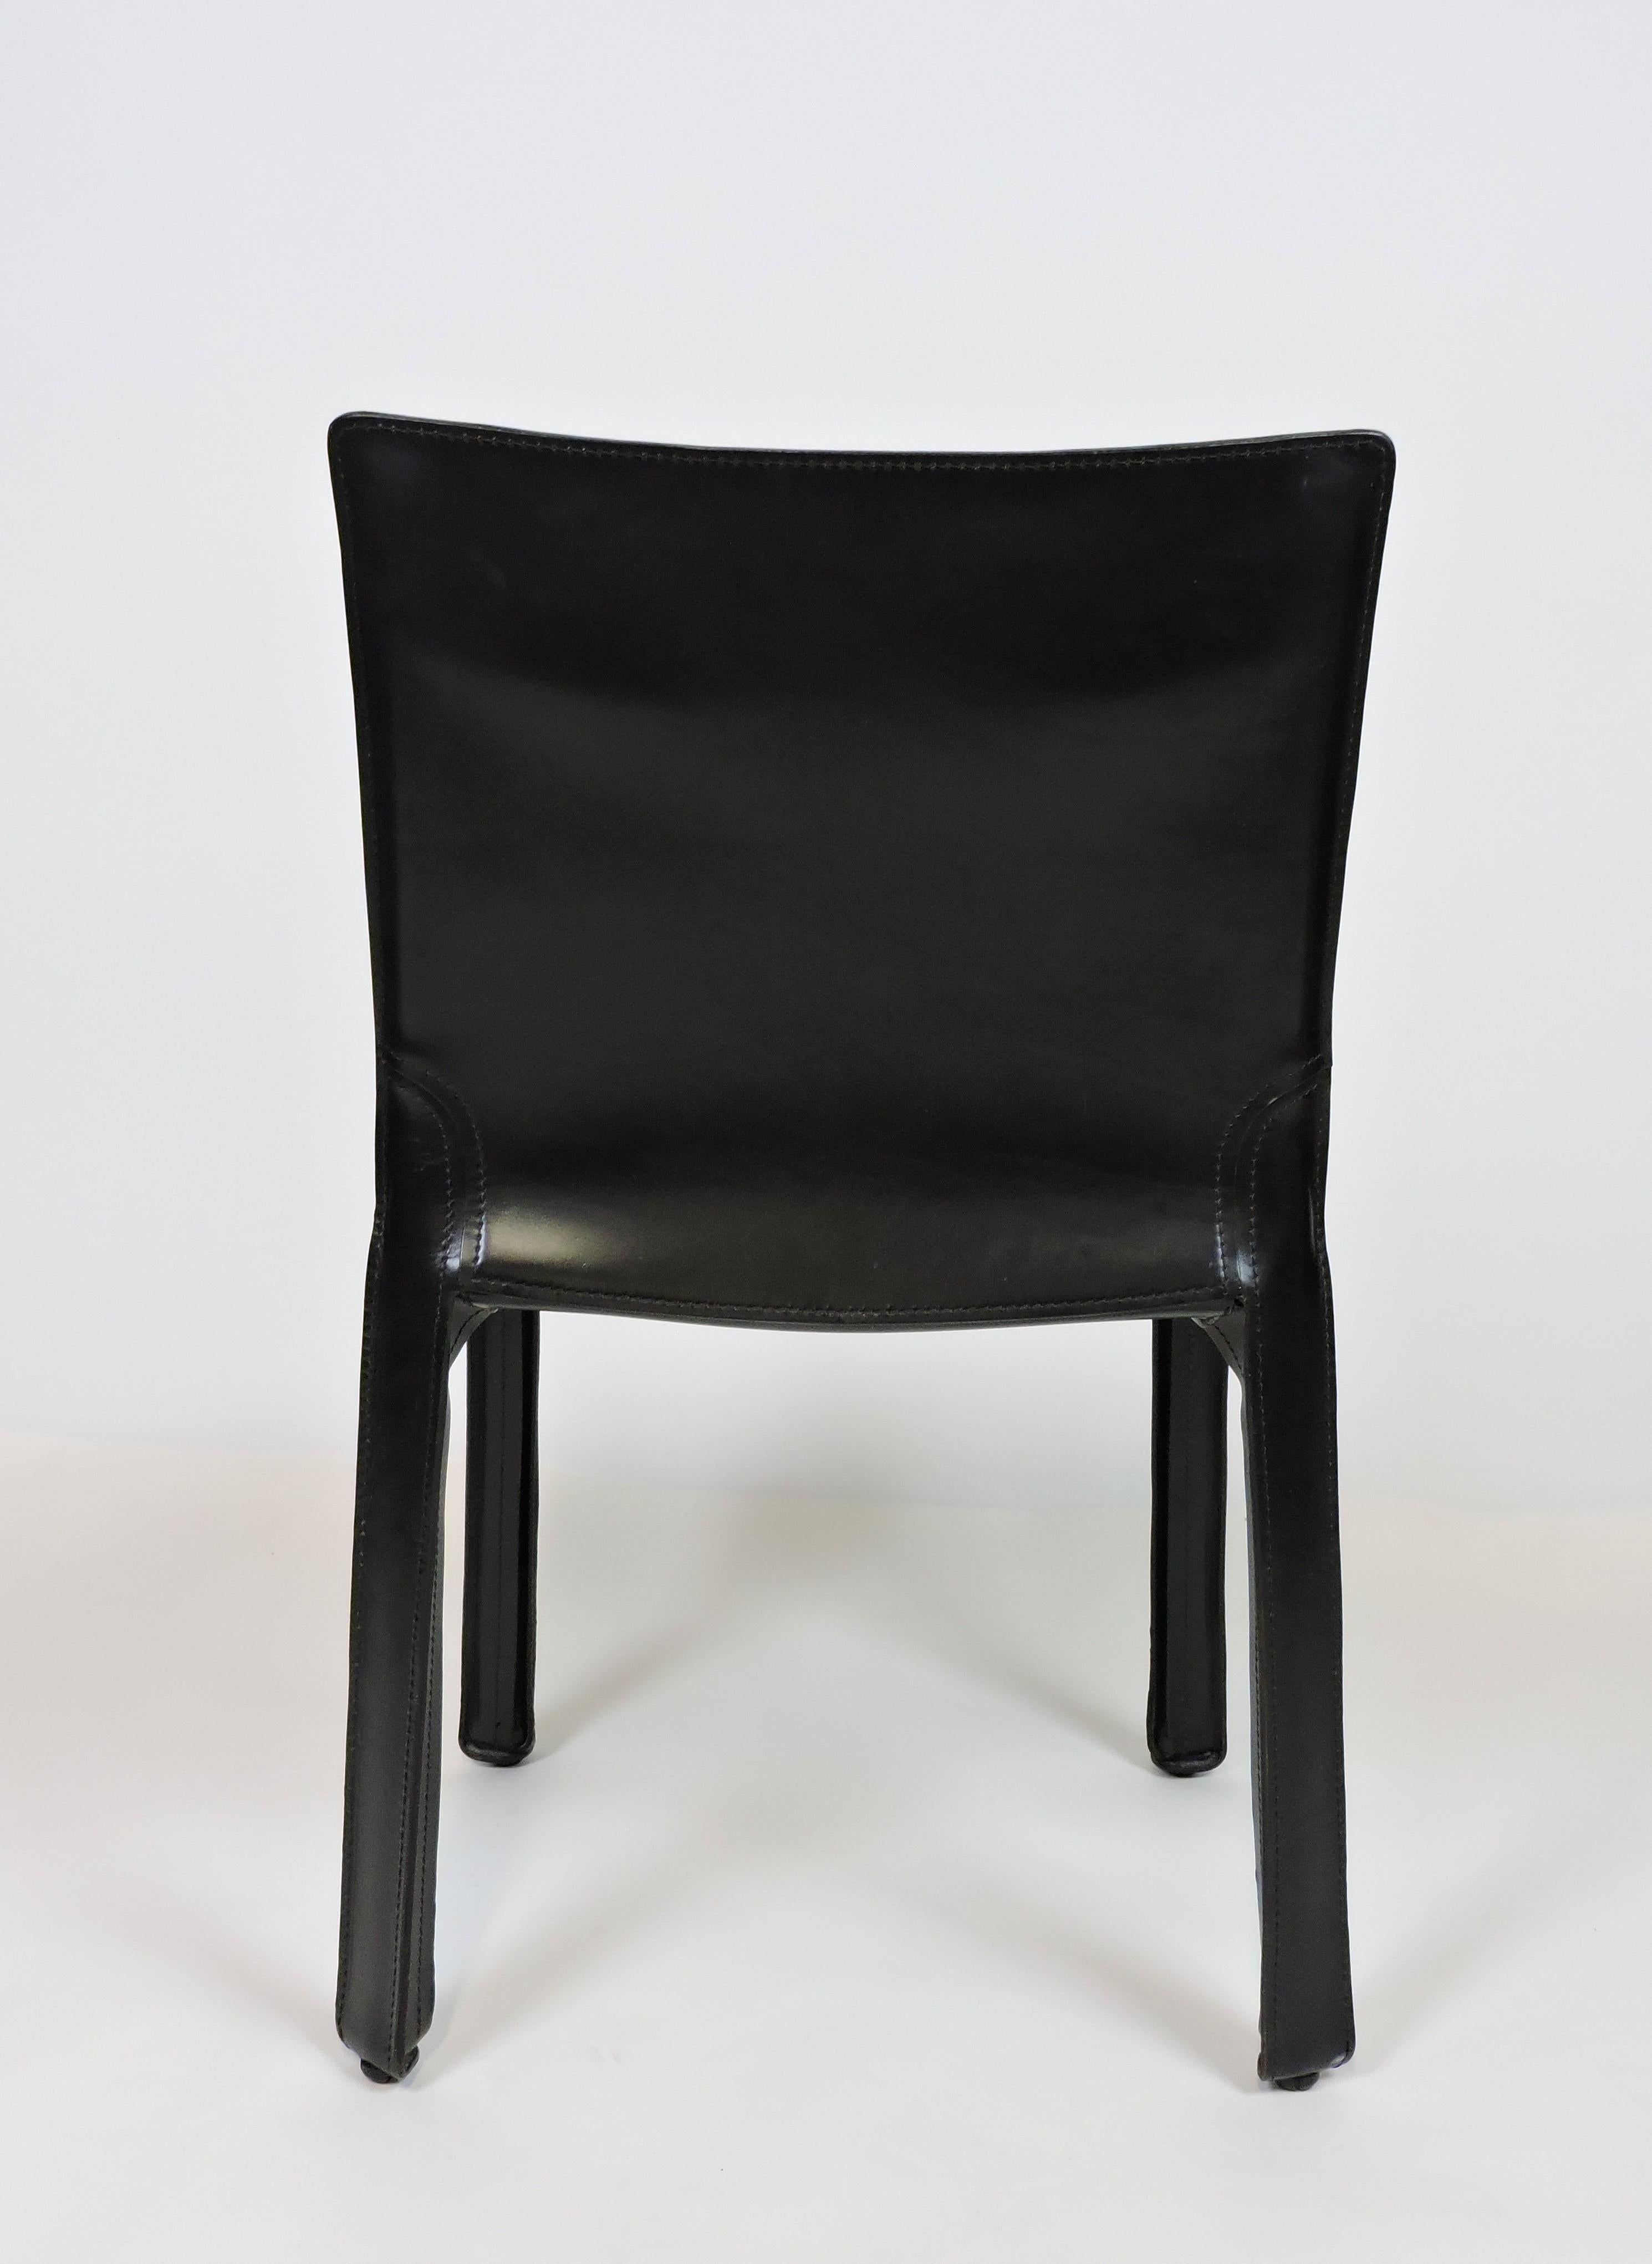 Late 20th Century Mario Bellini CAB 412 Italian Modern Black Leather Side Chair for Cassina